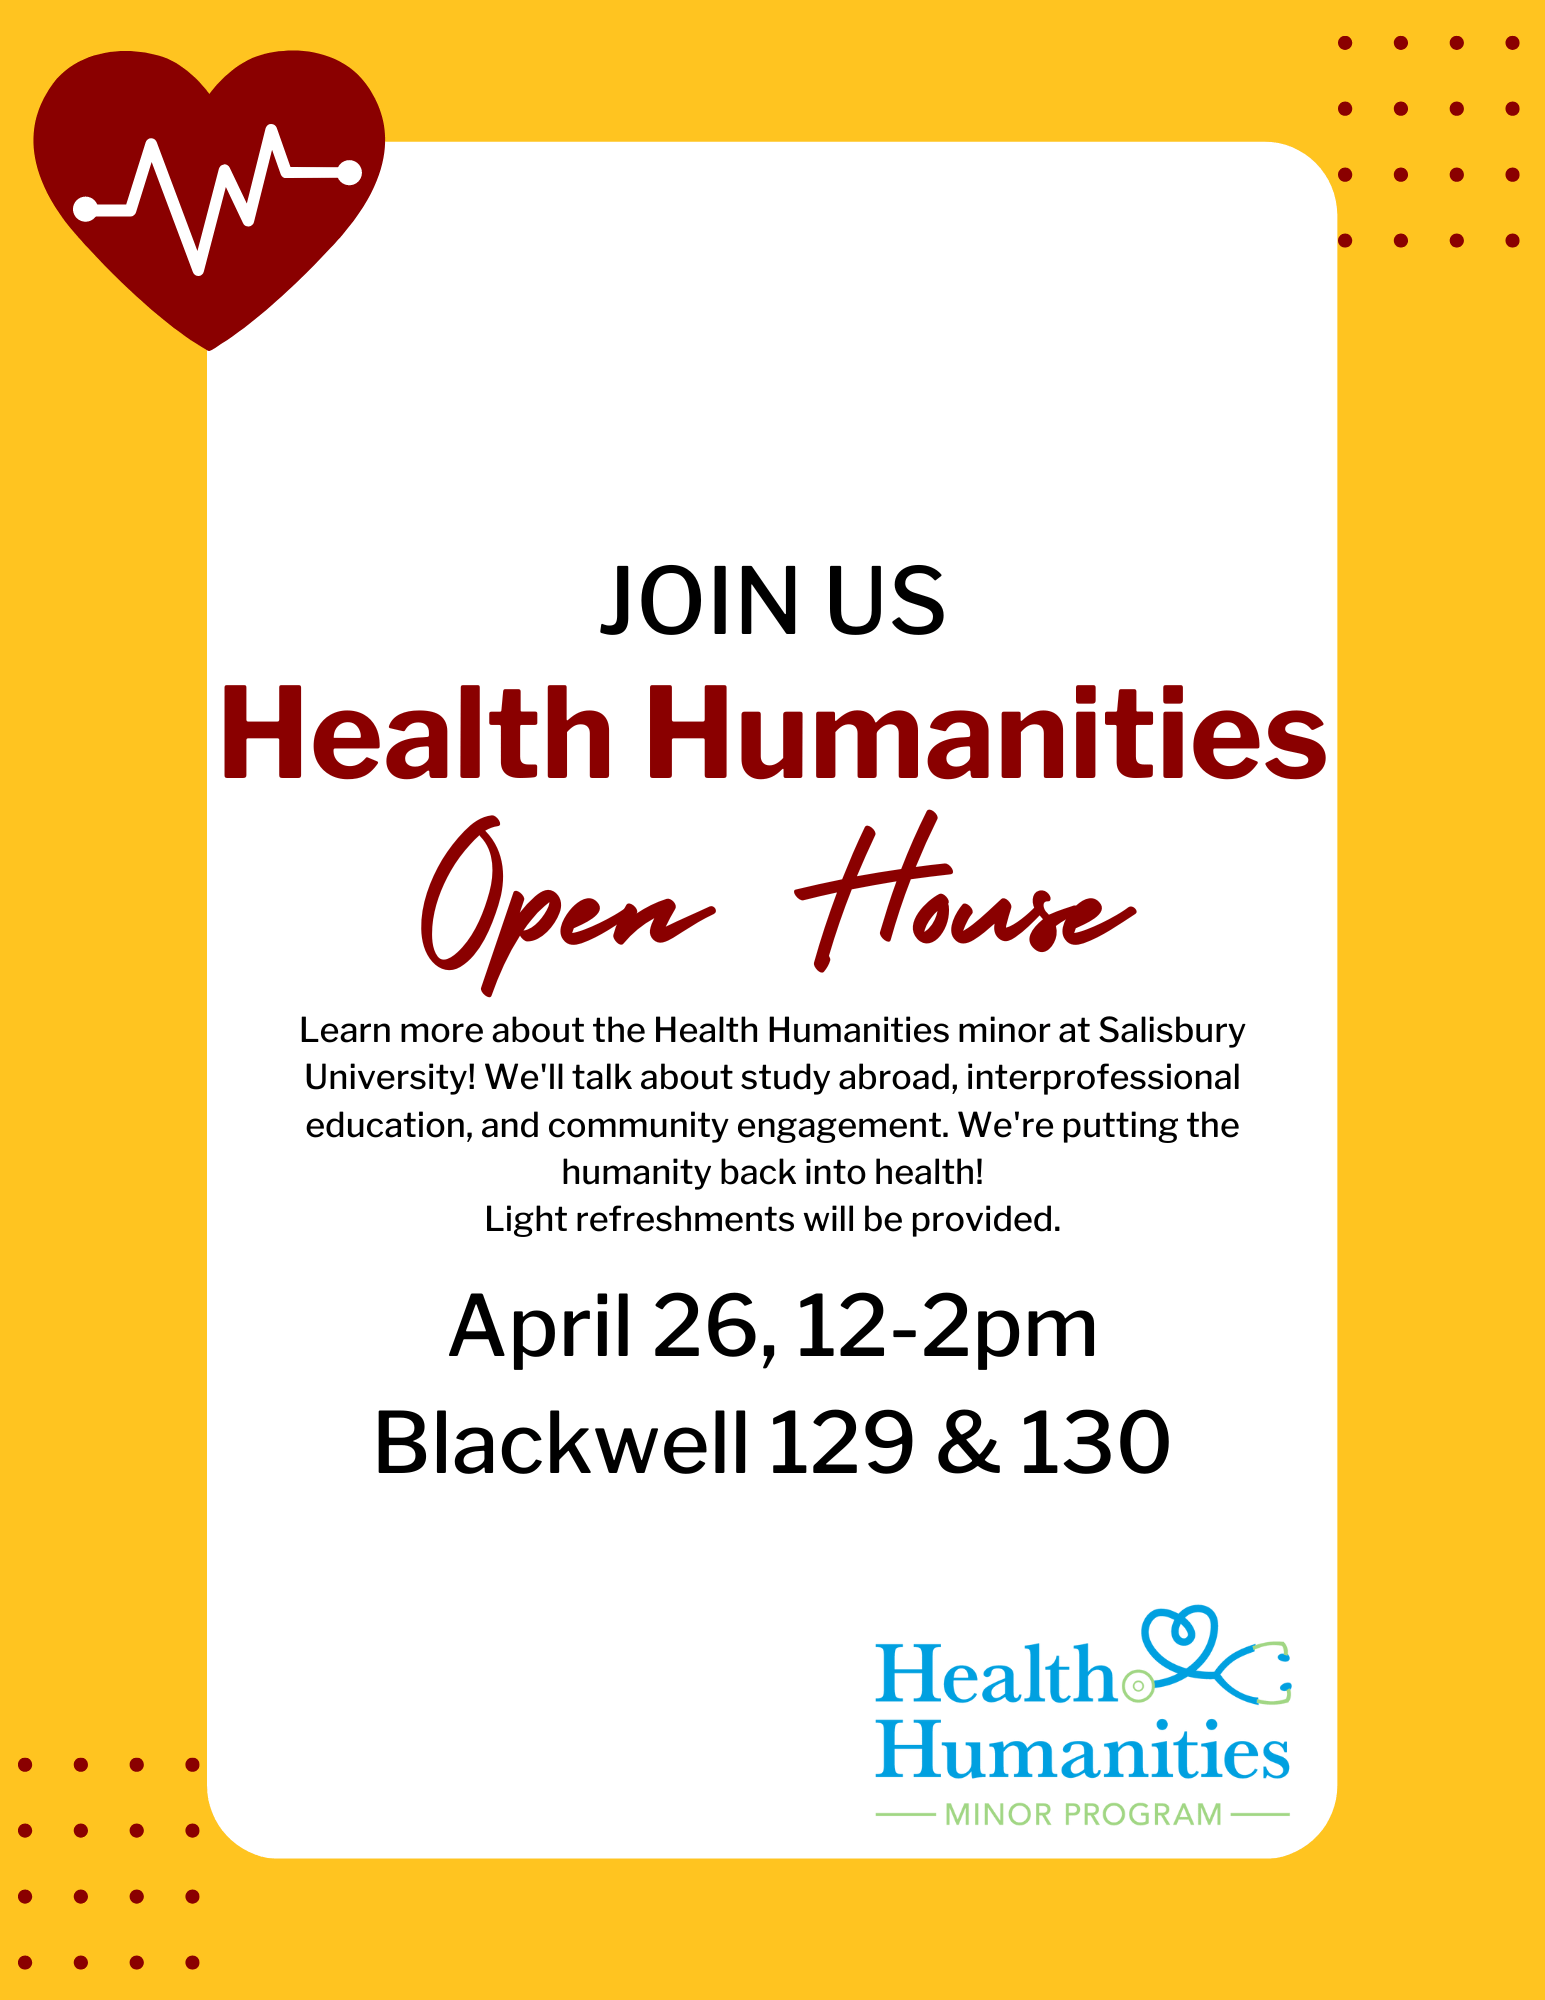 Health and Humanities Open House Flyer